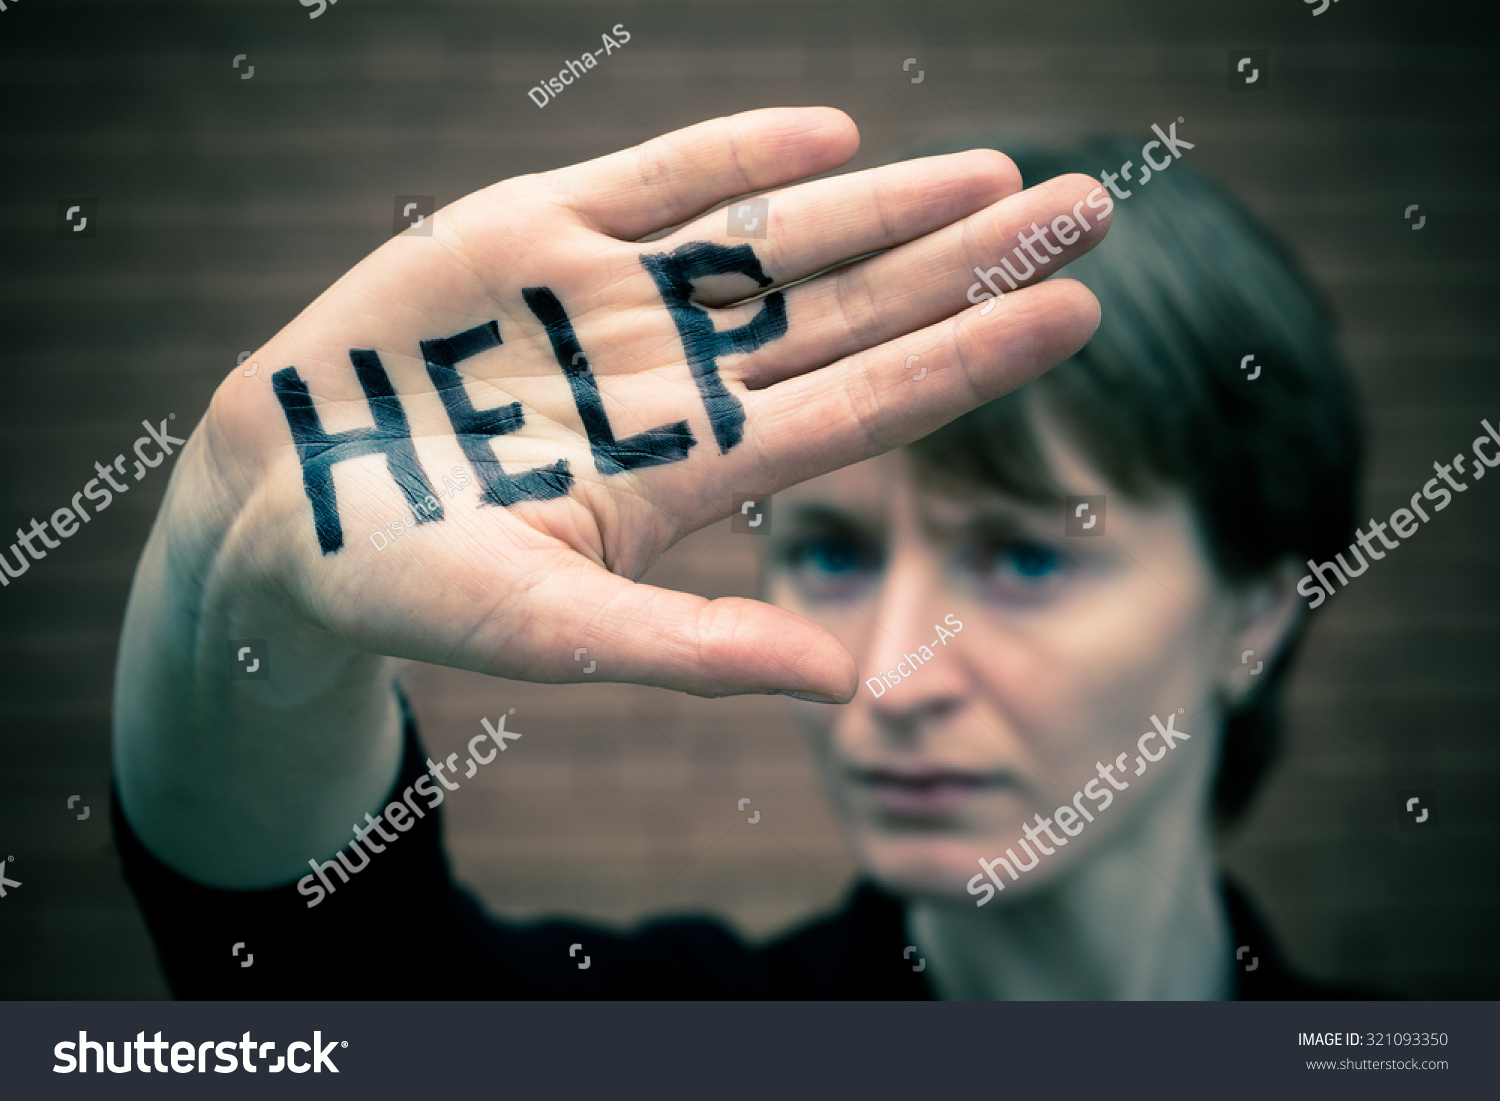 A woman covers her face with his hand on his hand written in black marker "help."  #321093350